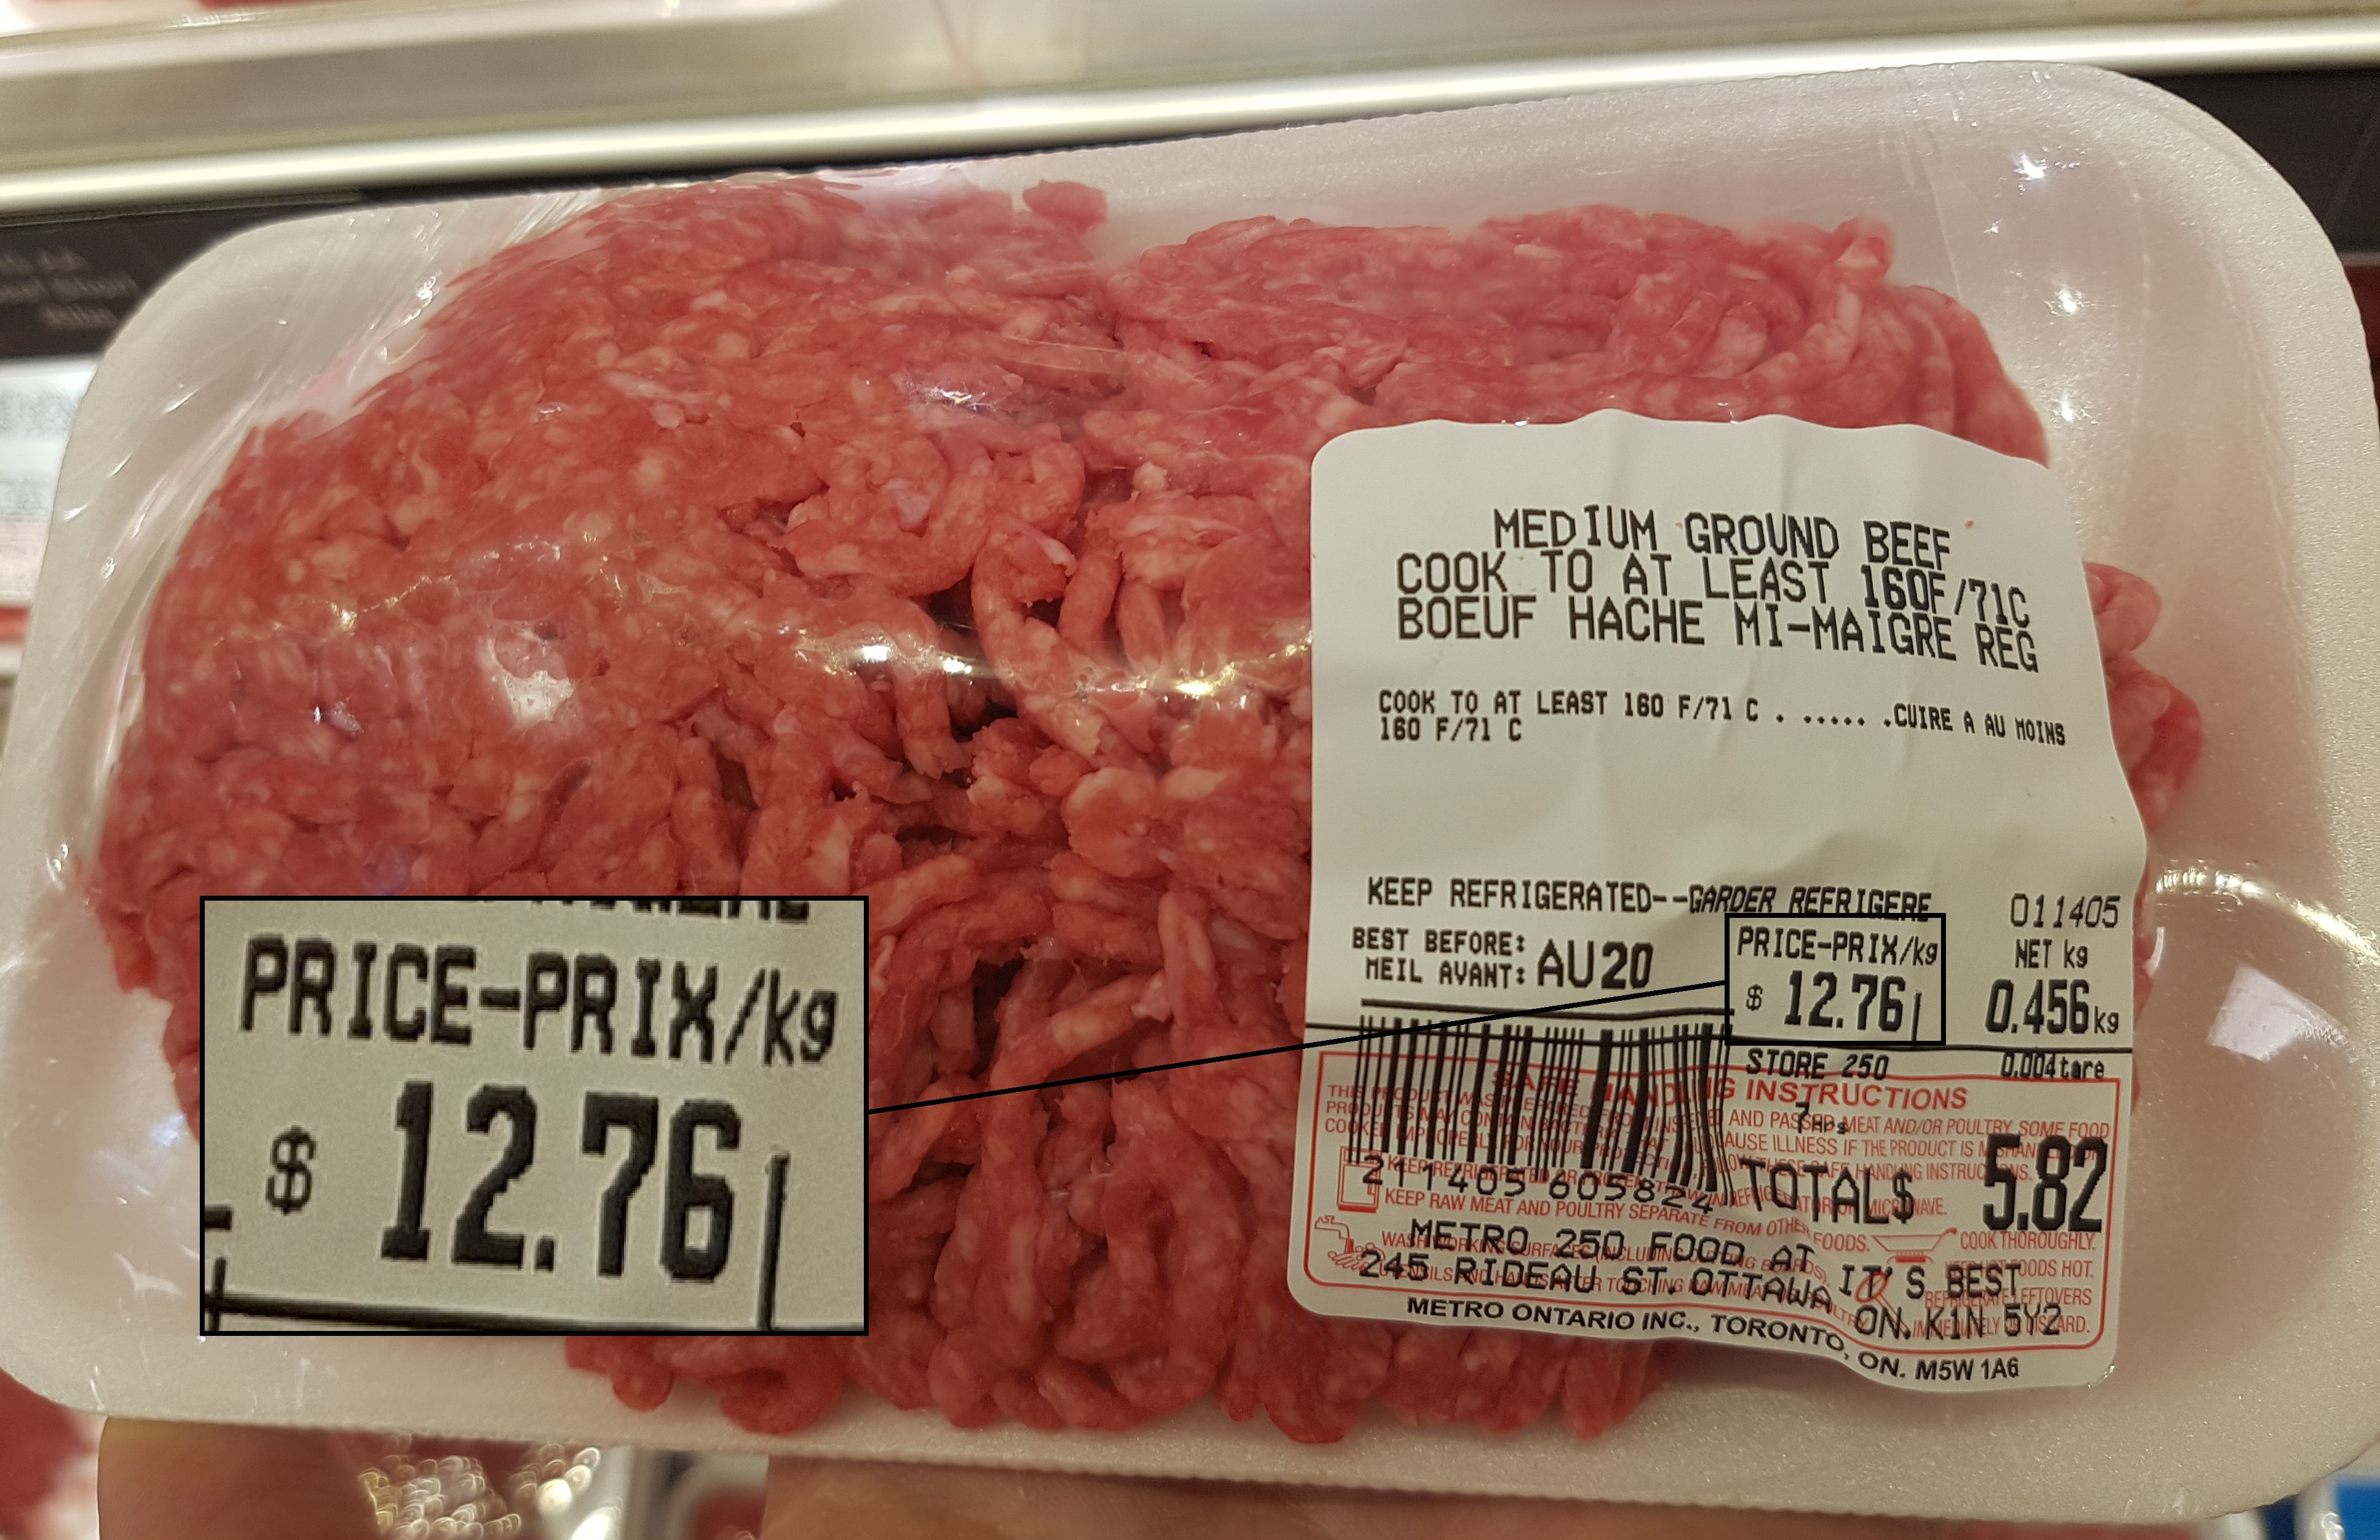 A carbon levy on this ground beef would increase the price by only 0.5-4%